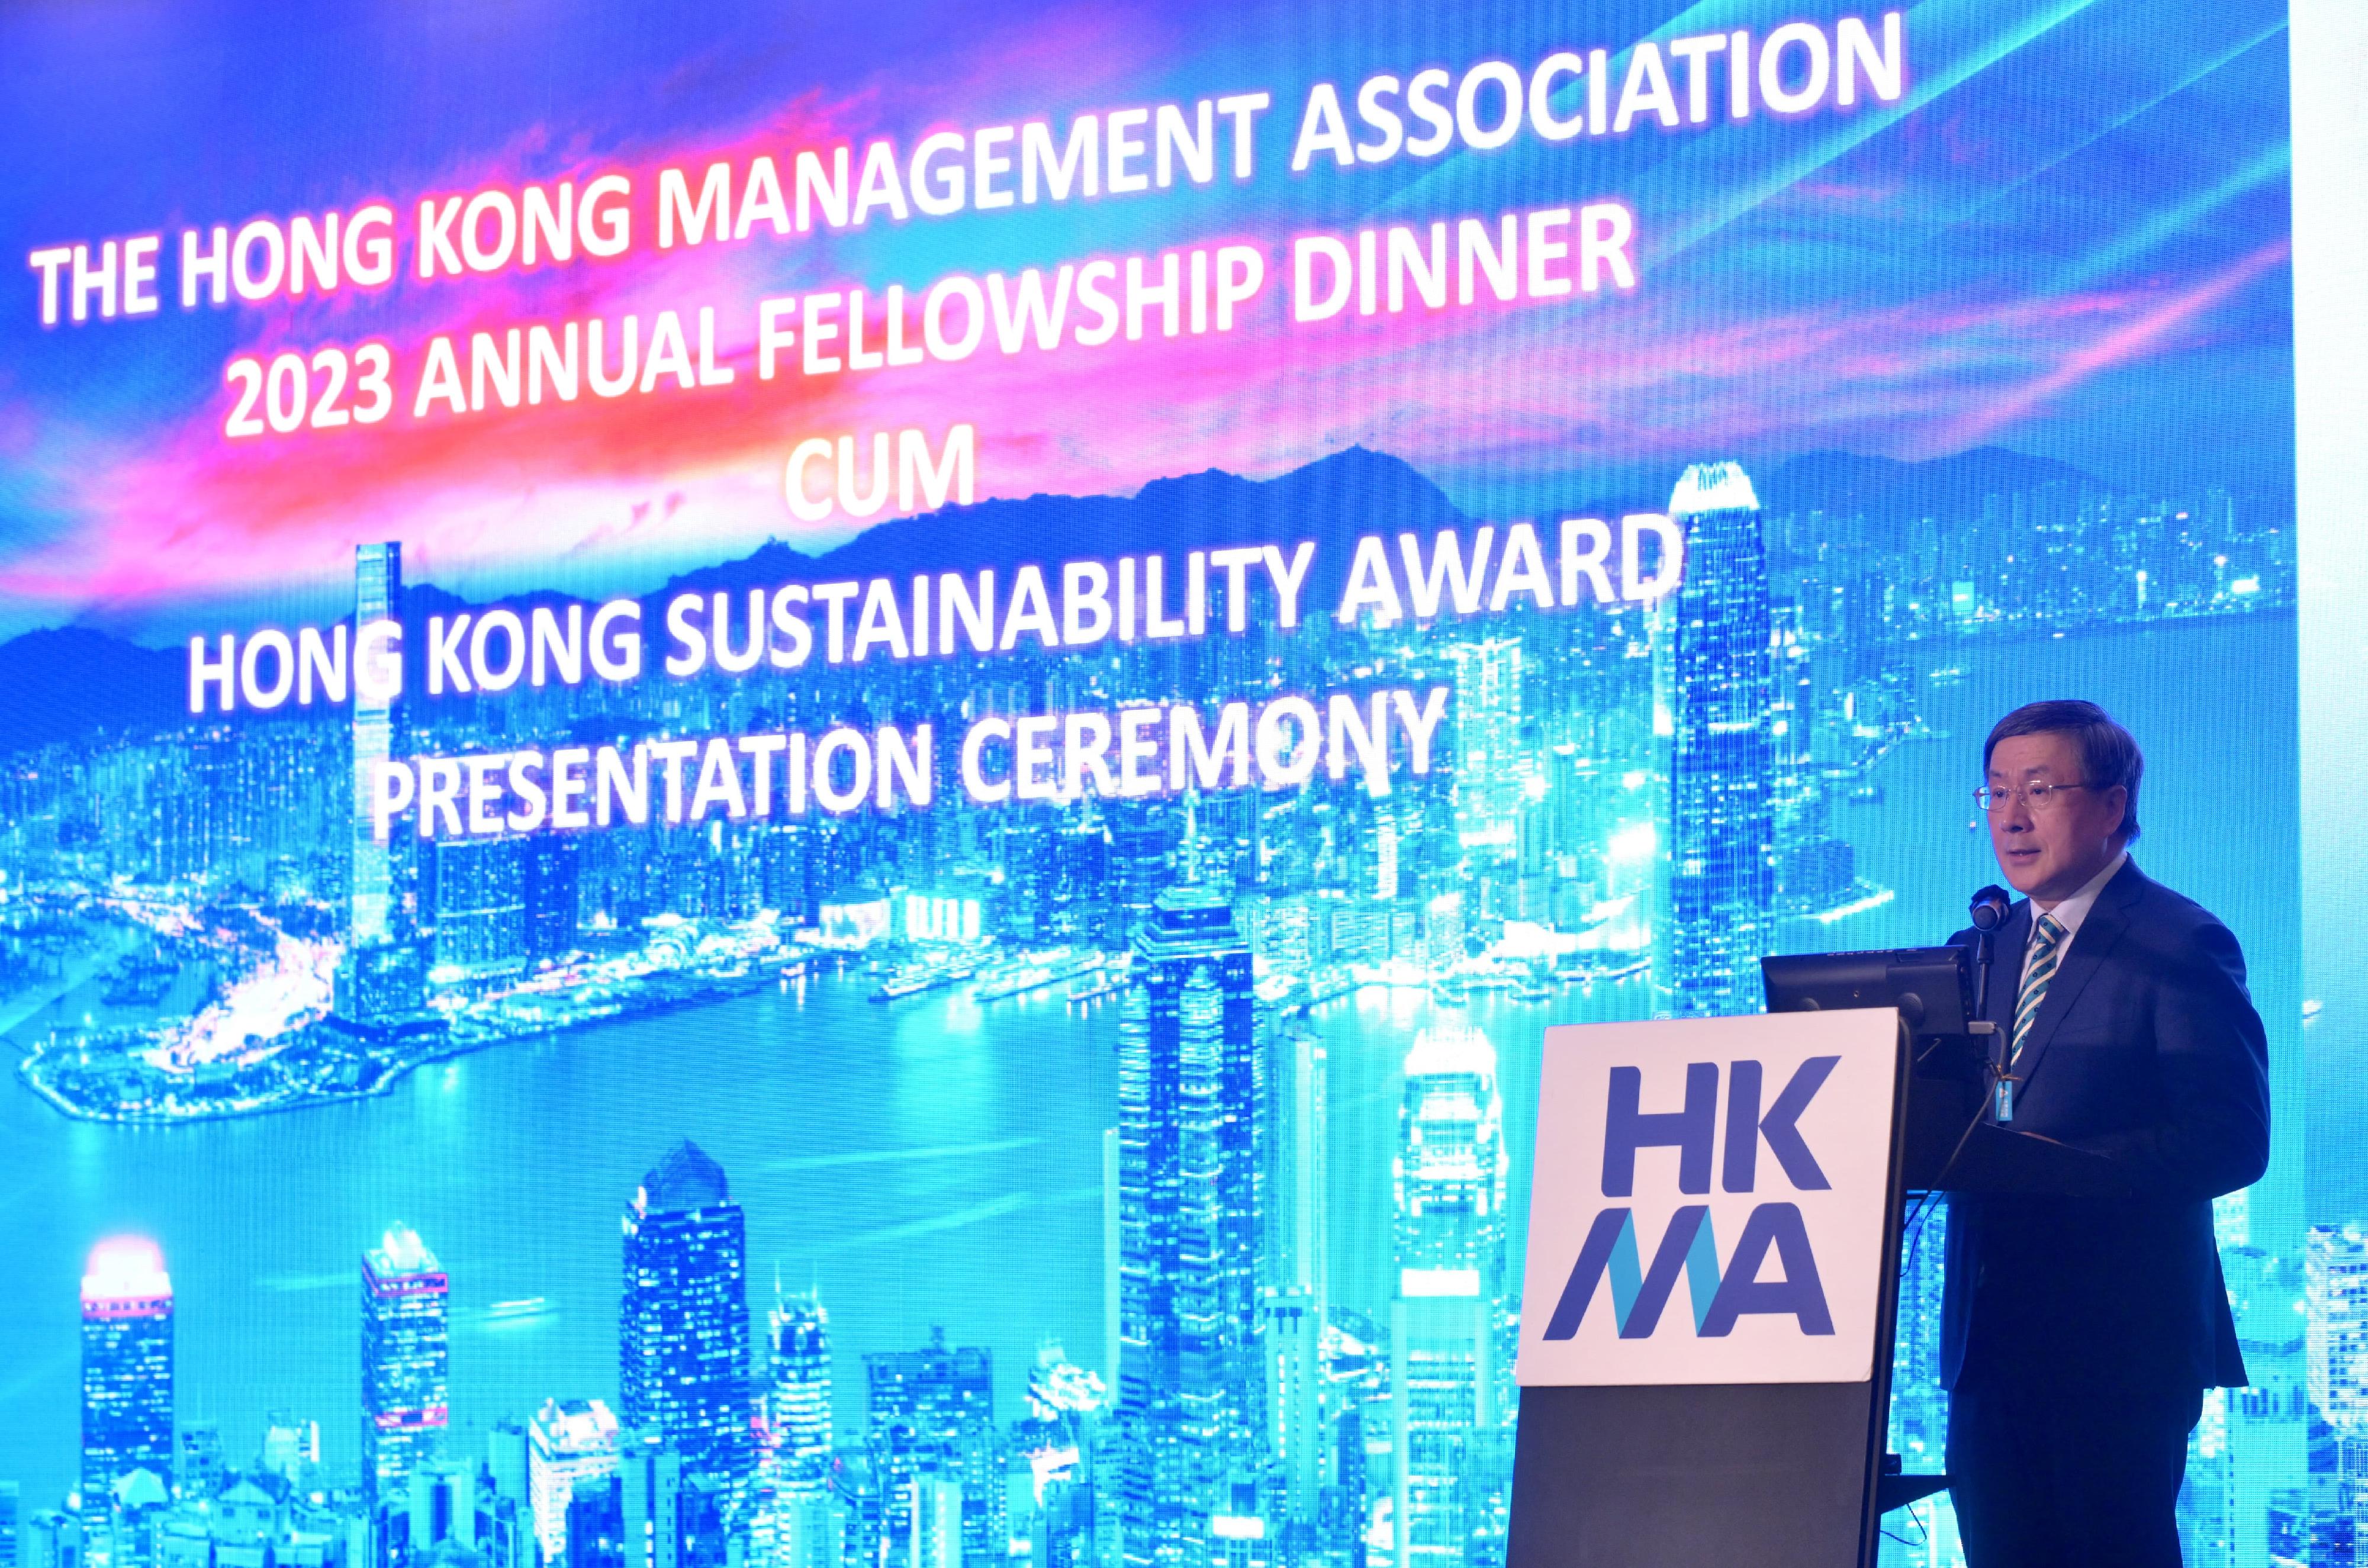 The Deputy Chief Secretary for Administration, Mr Cheuk Wing-hing, delivers a speech at the Hong Kong Management Association 2023 Annual Fellowship Dinner cum Hong Kong Sustainability Award Presentation Ceremony tonight (November 14).